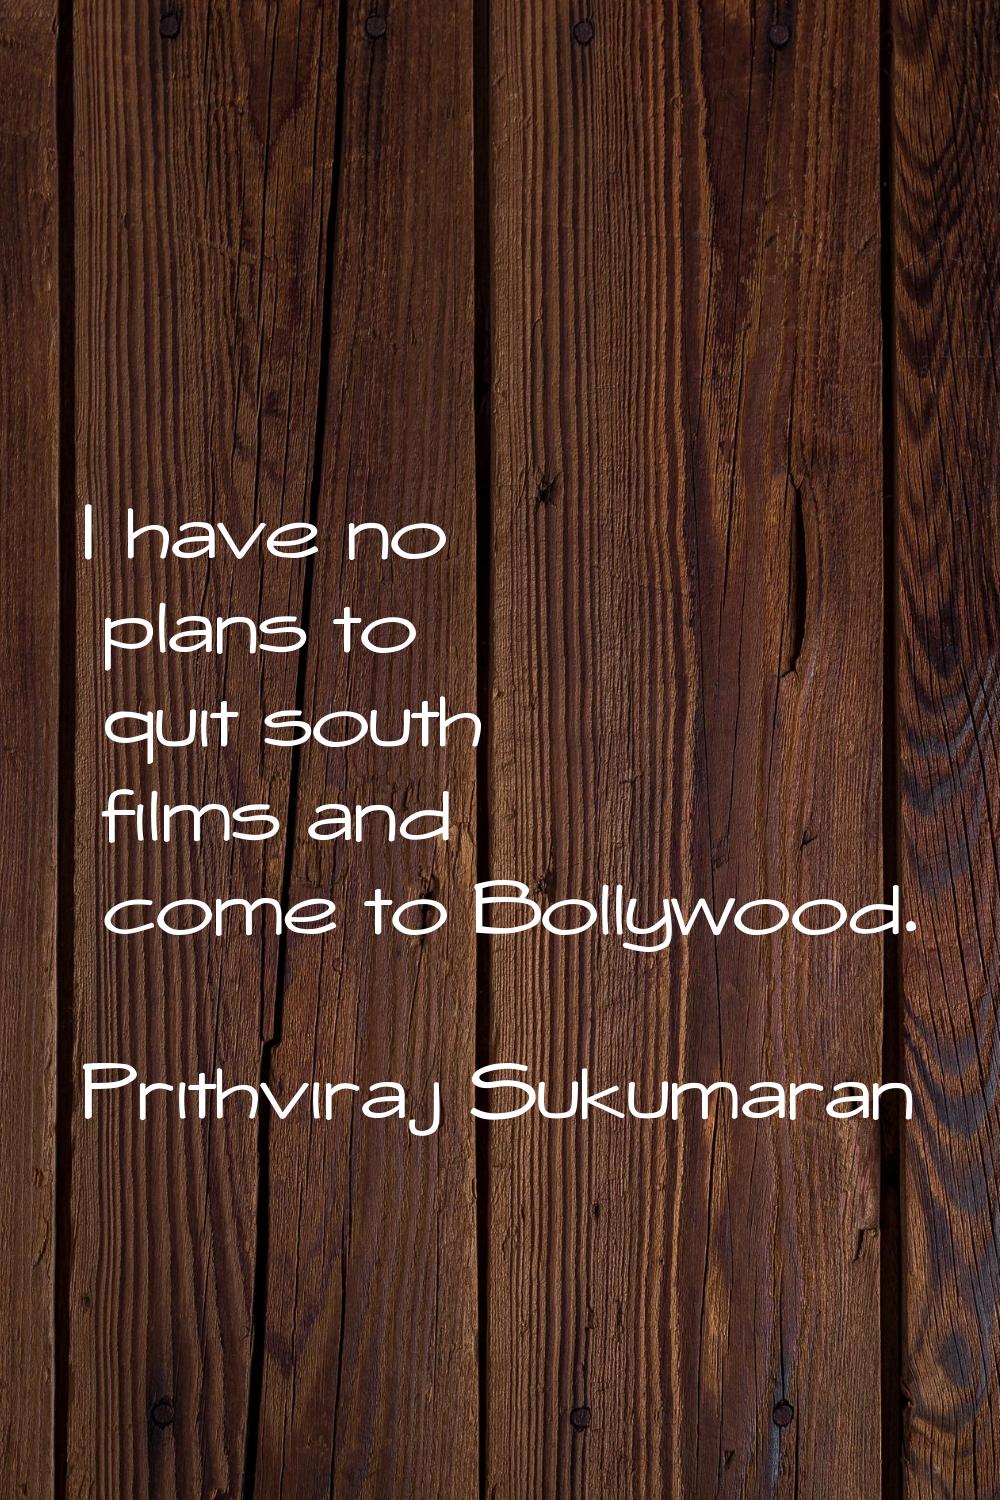 I have no plans to quit south films and come to Bollywood.